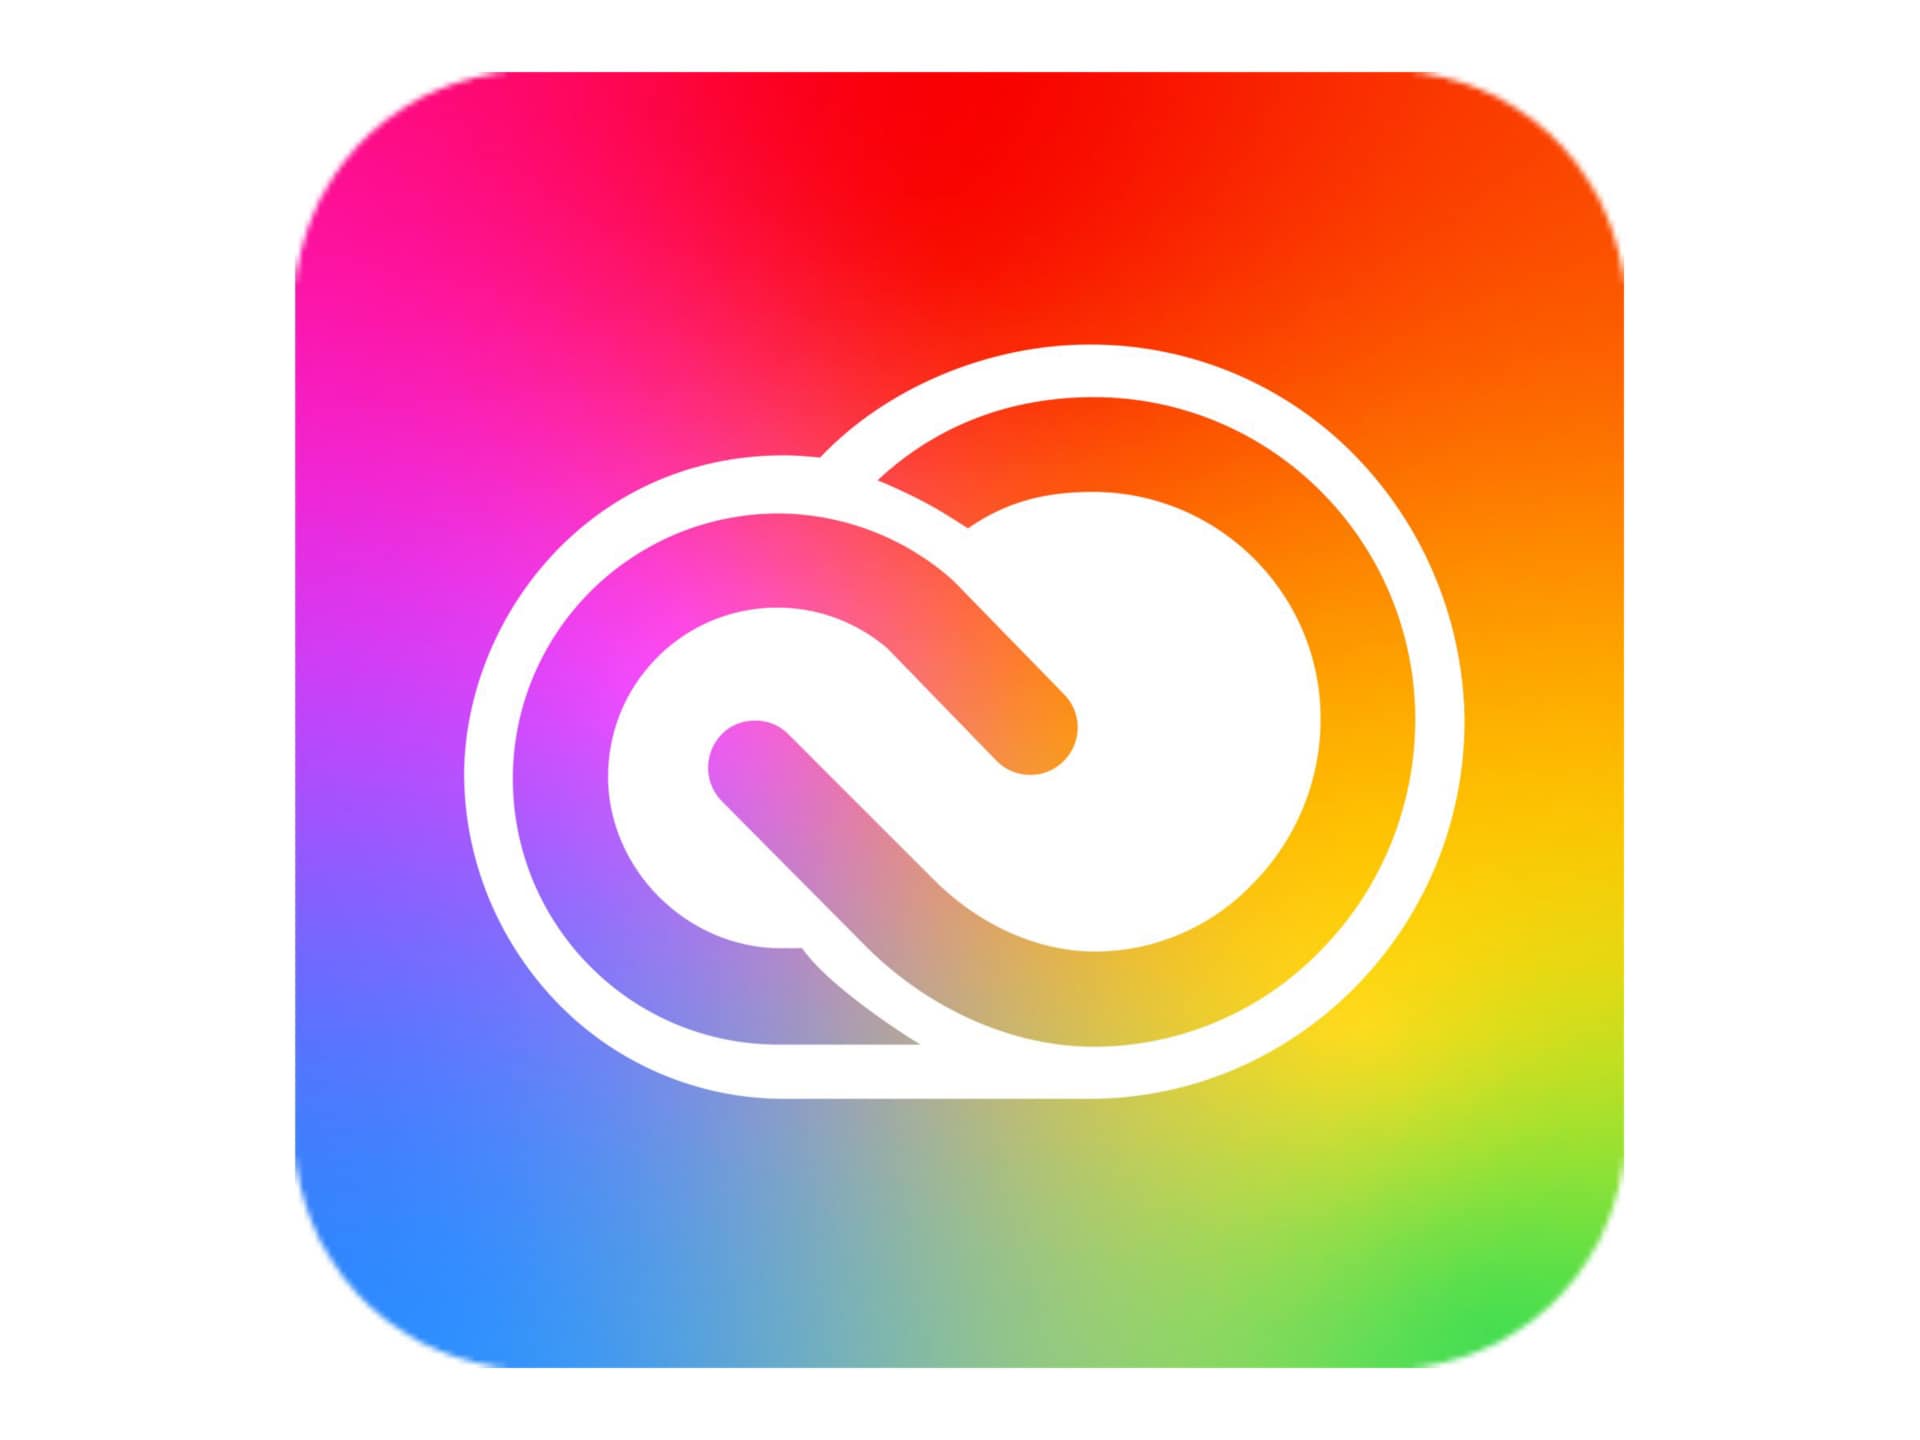 Adobe Creative Cloud for Enterprise - All Apps - Feature Restricted Licensi